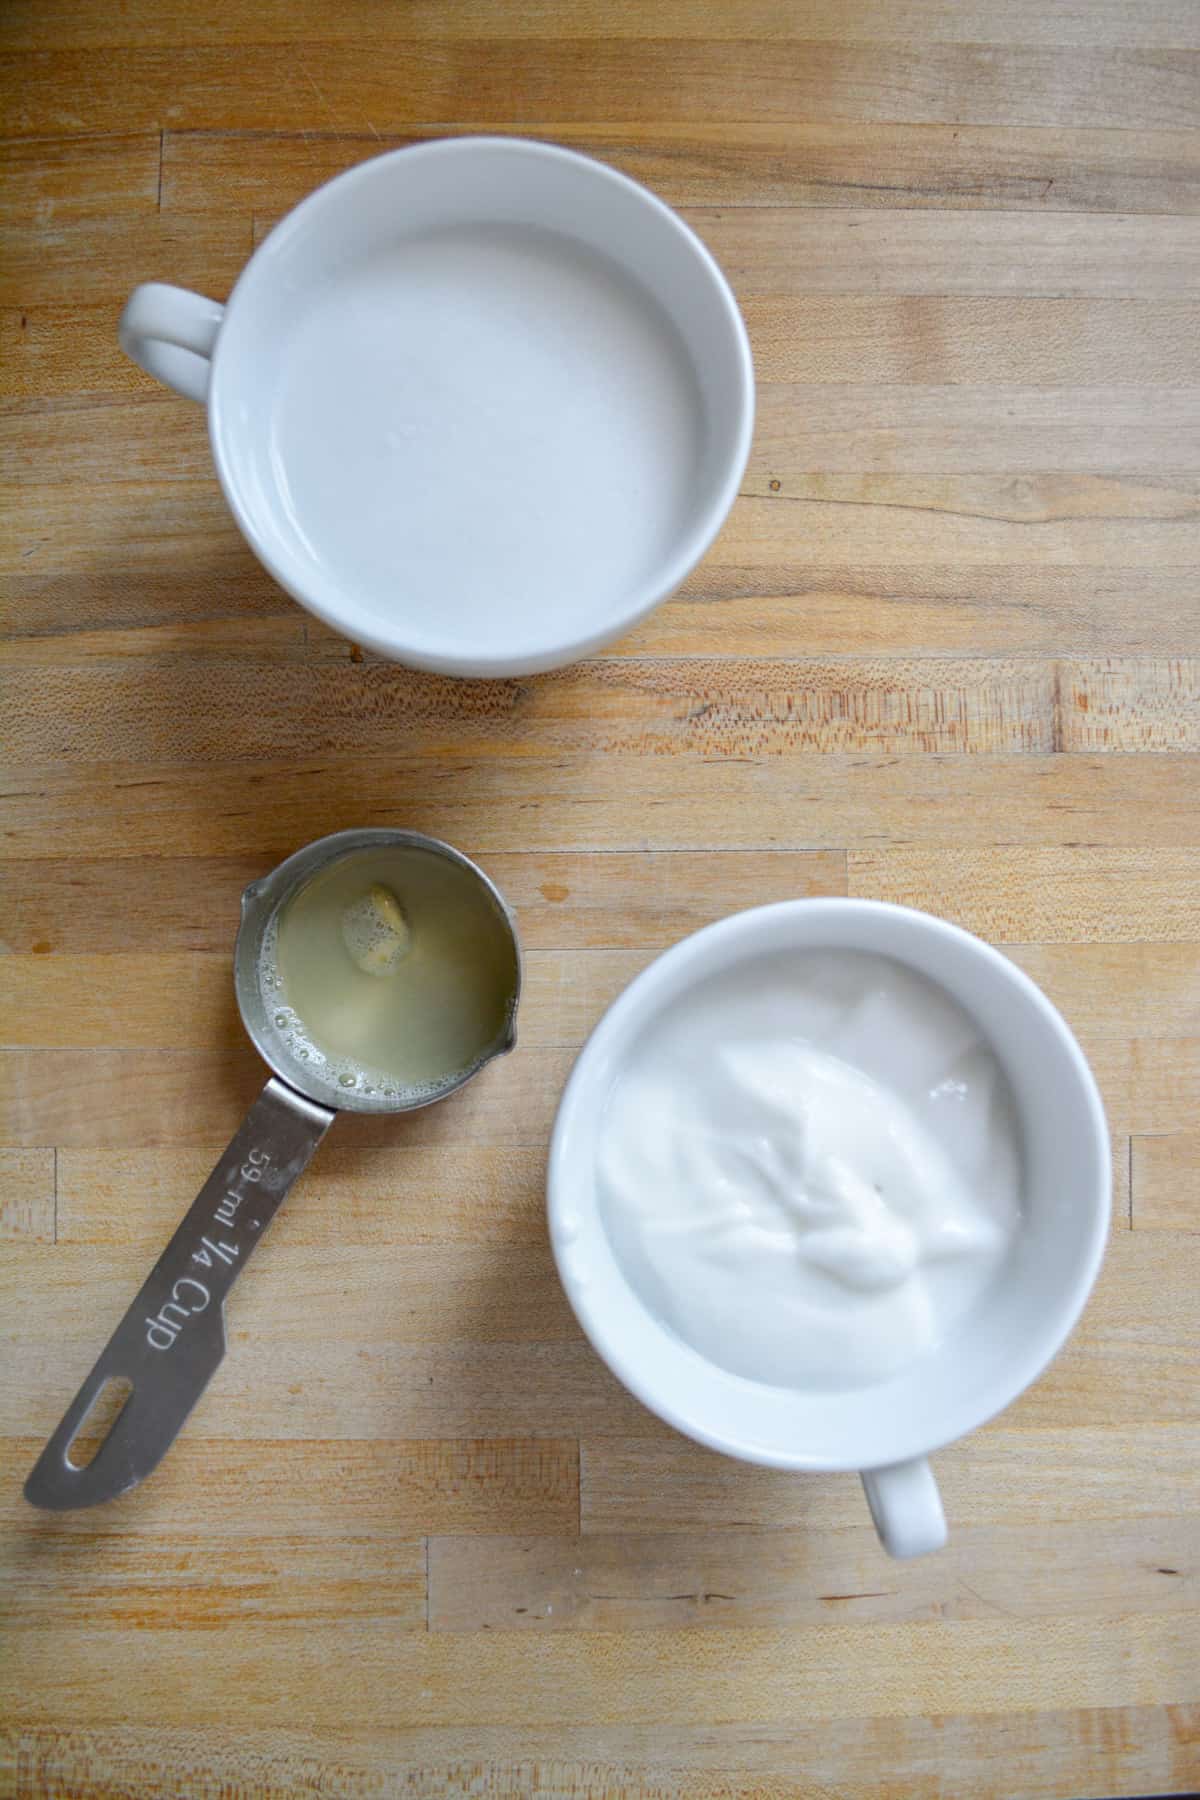 A small cup of vegan yogurt, a small cup of dairy free milk and a small measuring cup of lemon juice on a wooden surface.